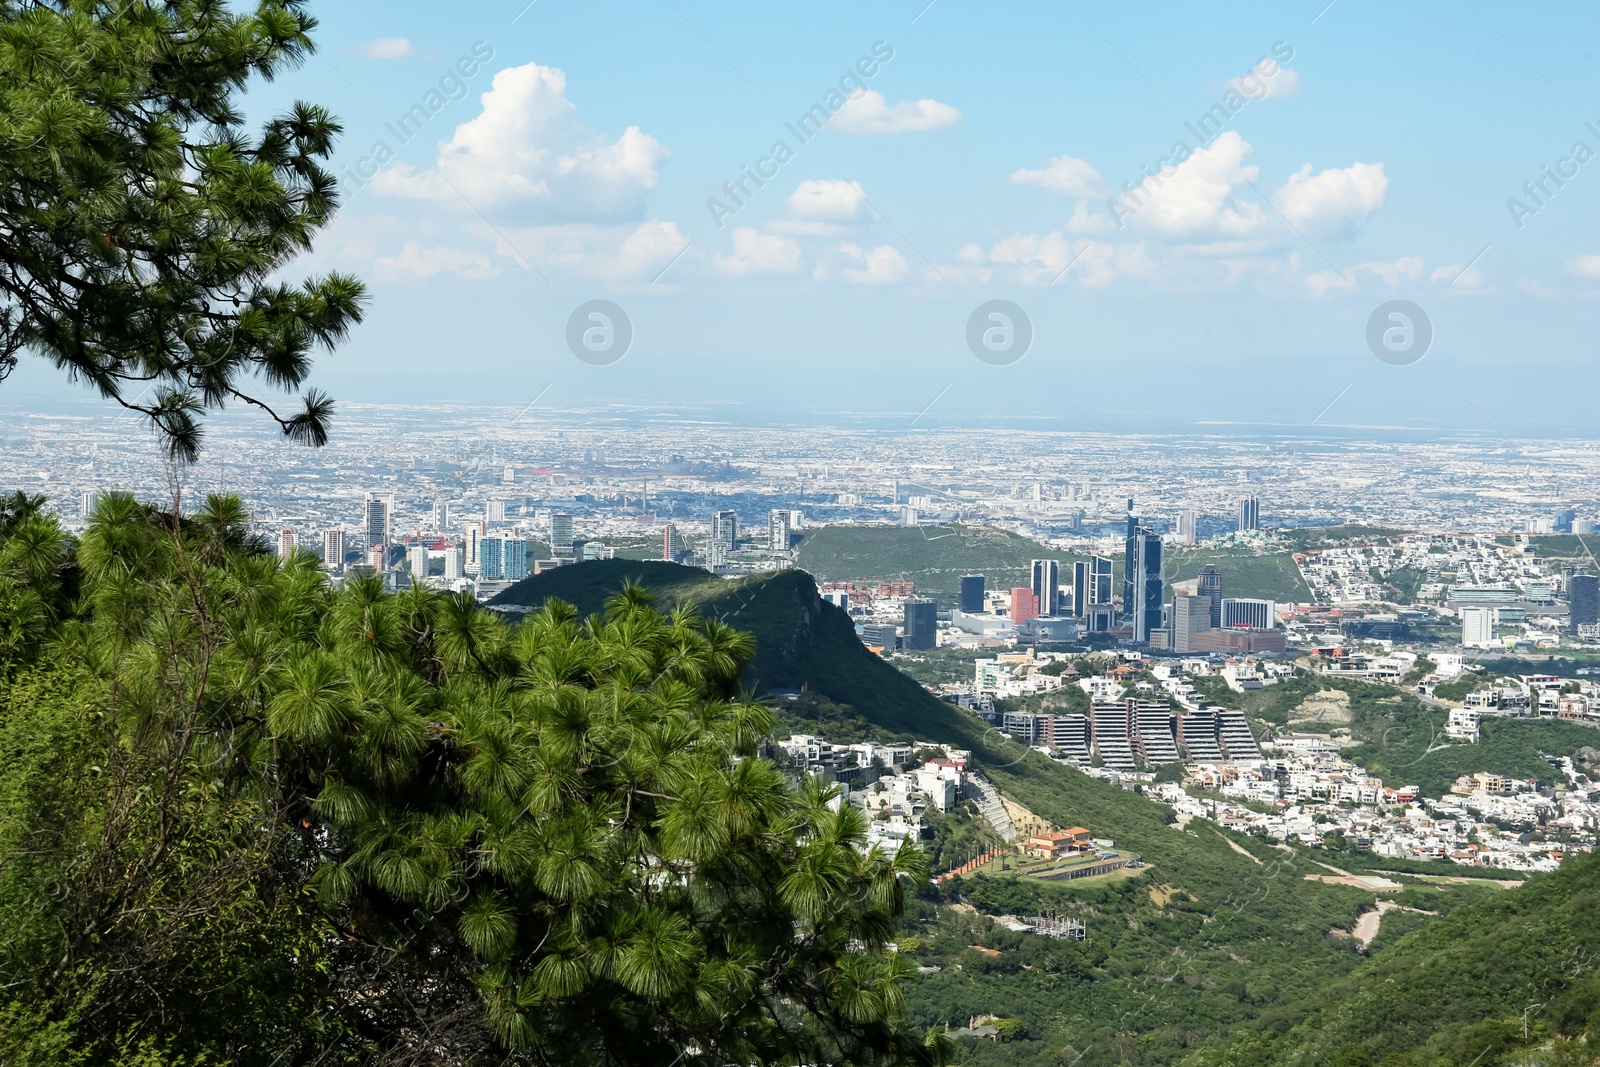 Photo of Picturesque view of city with trees and buildings under beautiful sky